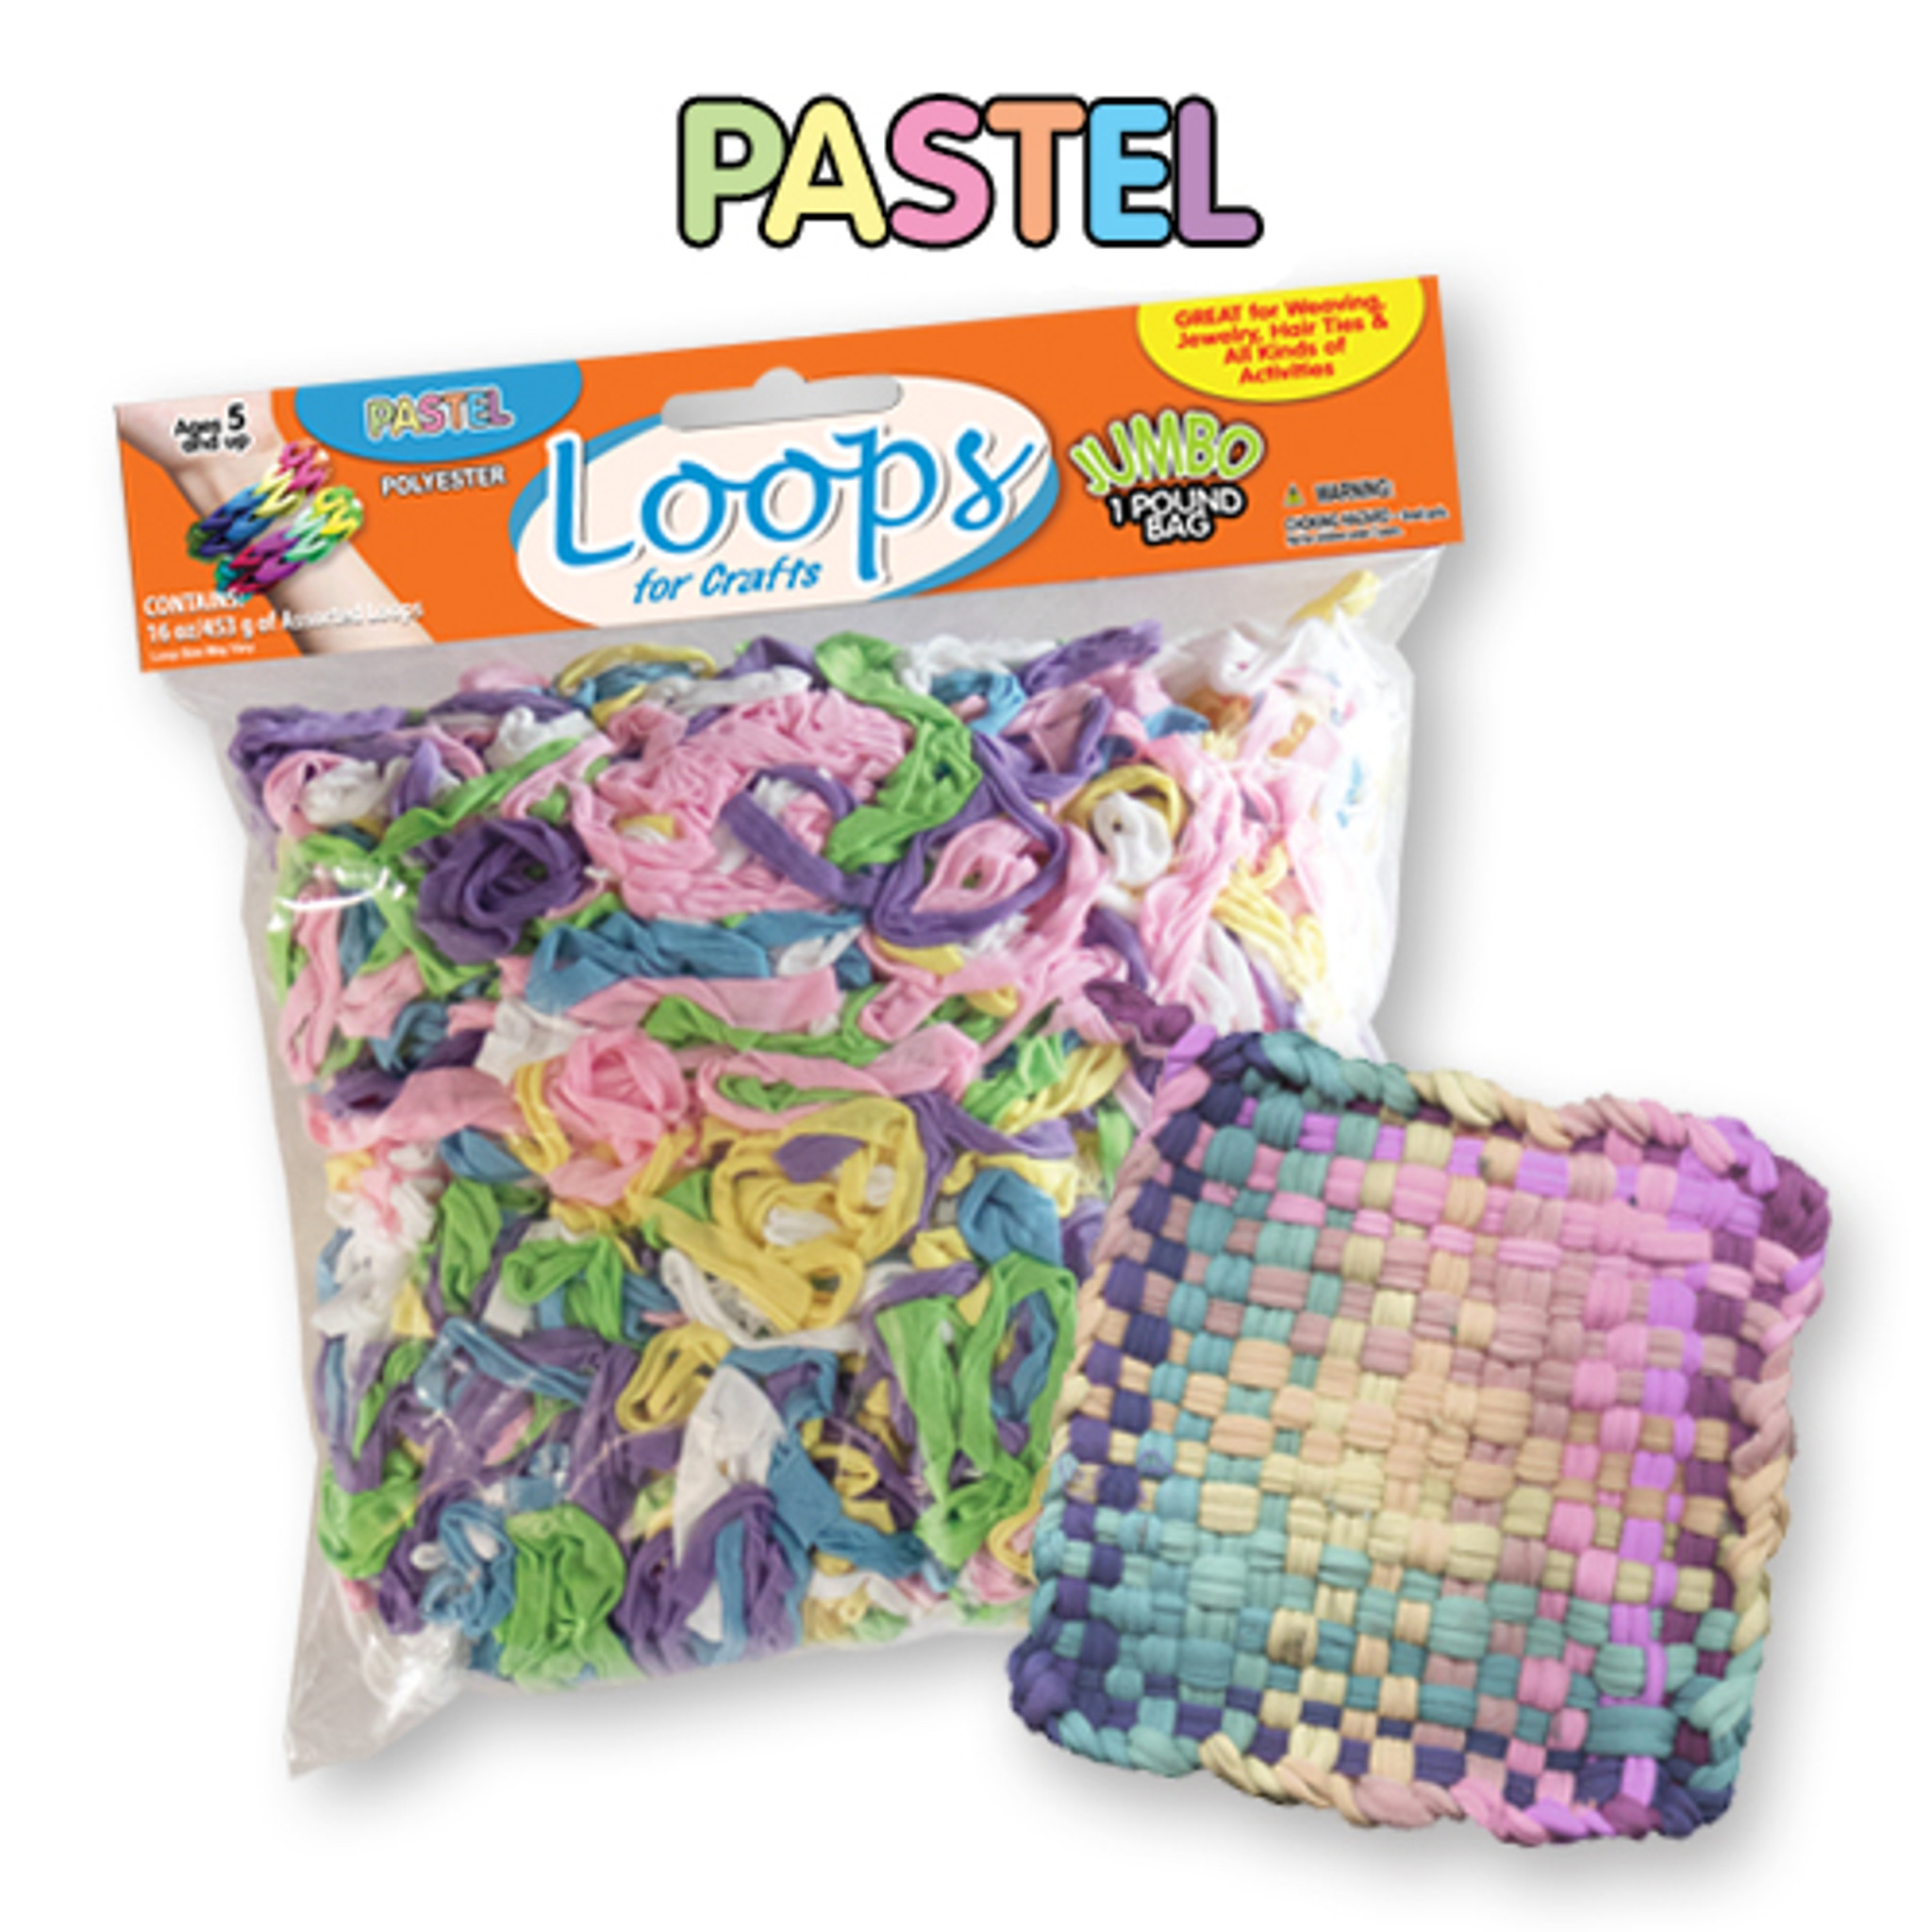 Pastel color 16oz bag of polyester loops